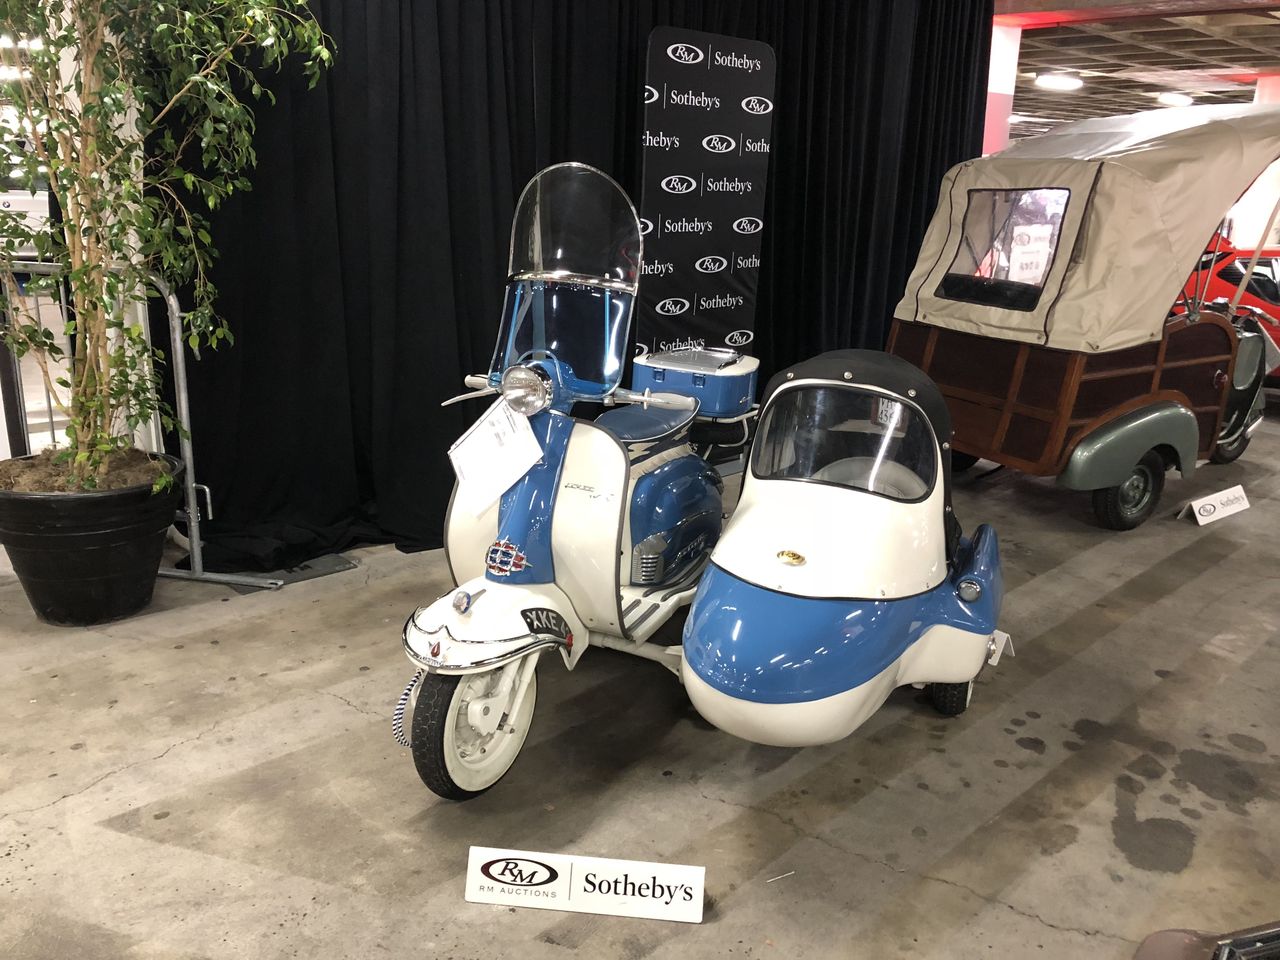 This 1961 example features a rare side car